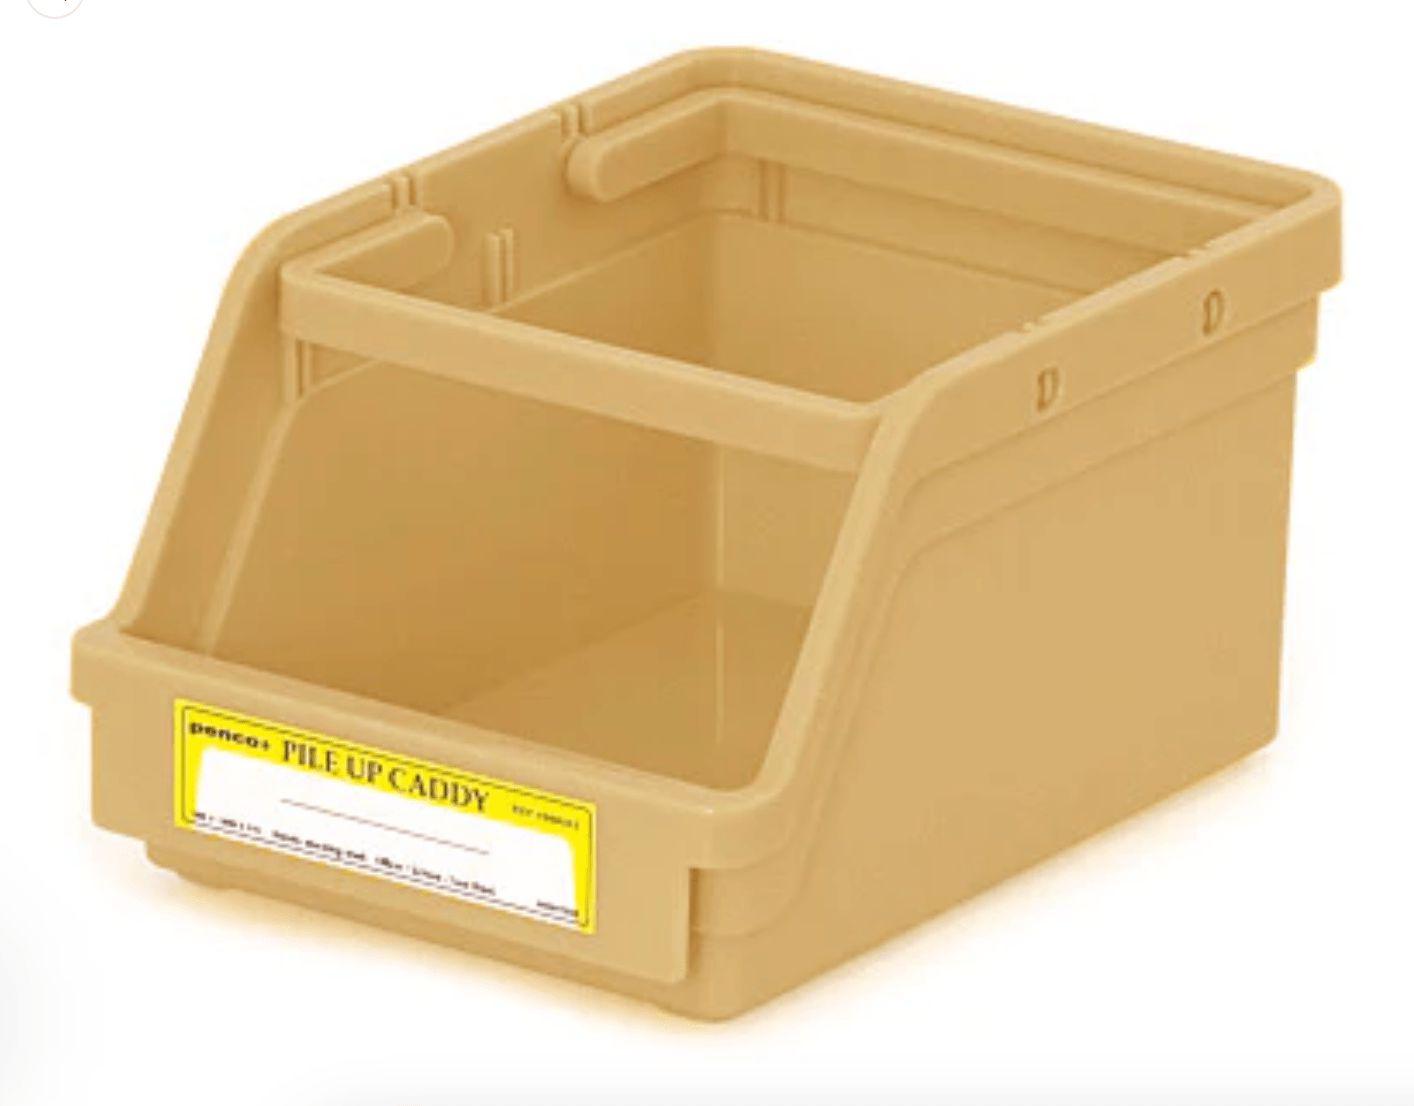 A Pile-up Caddy Beige bin with a yellow label on it. Brand Name: PENCO